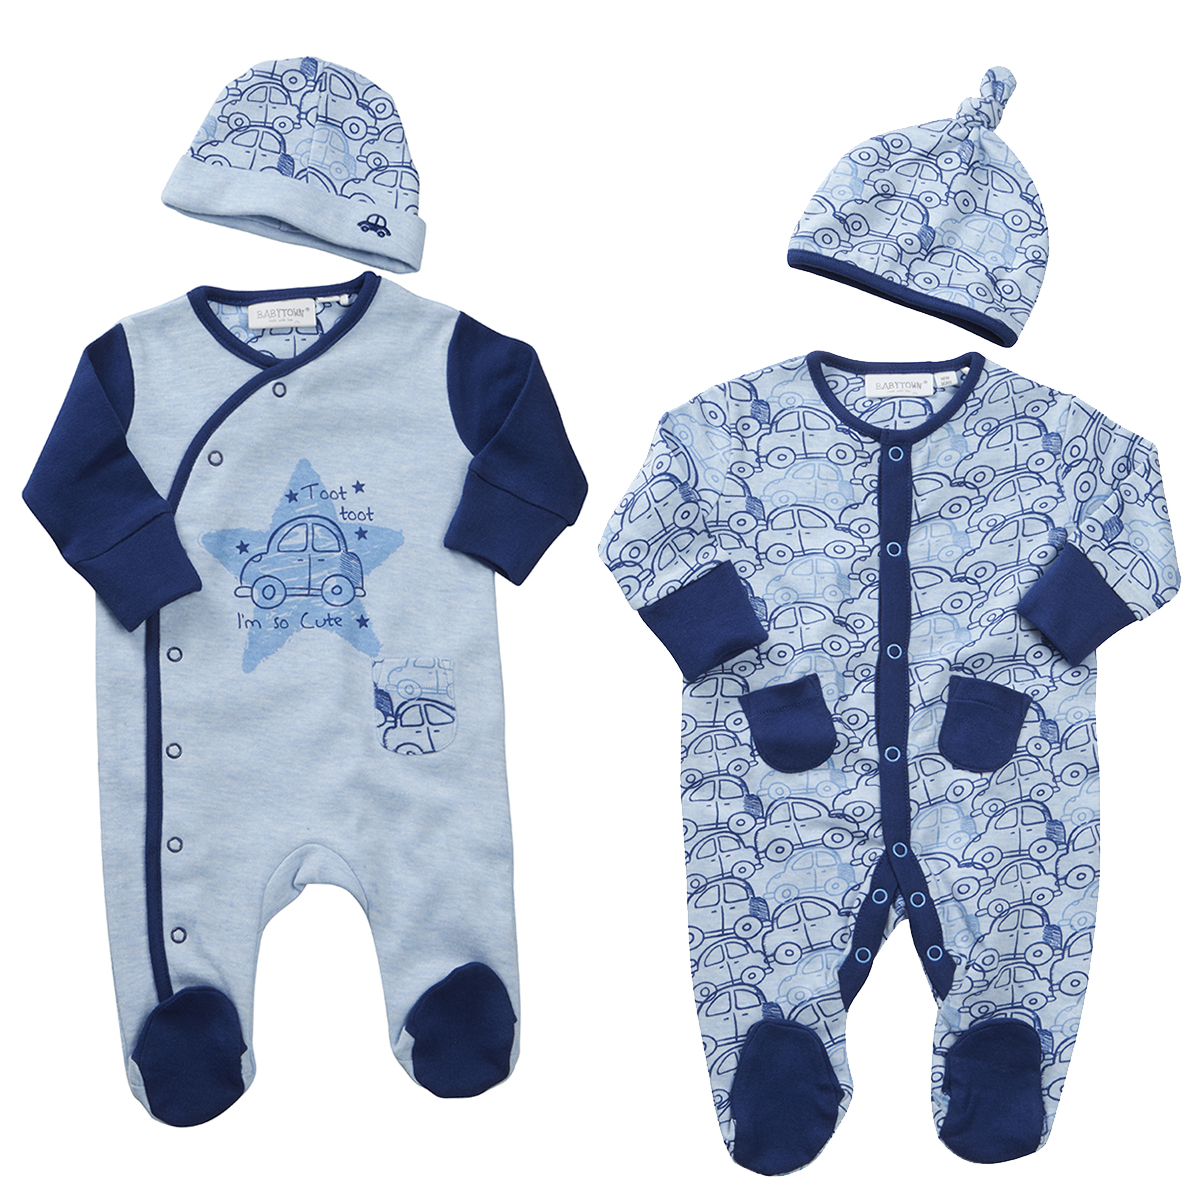 cute sleepsuits for babies